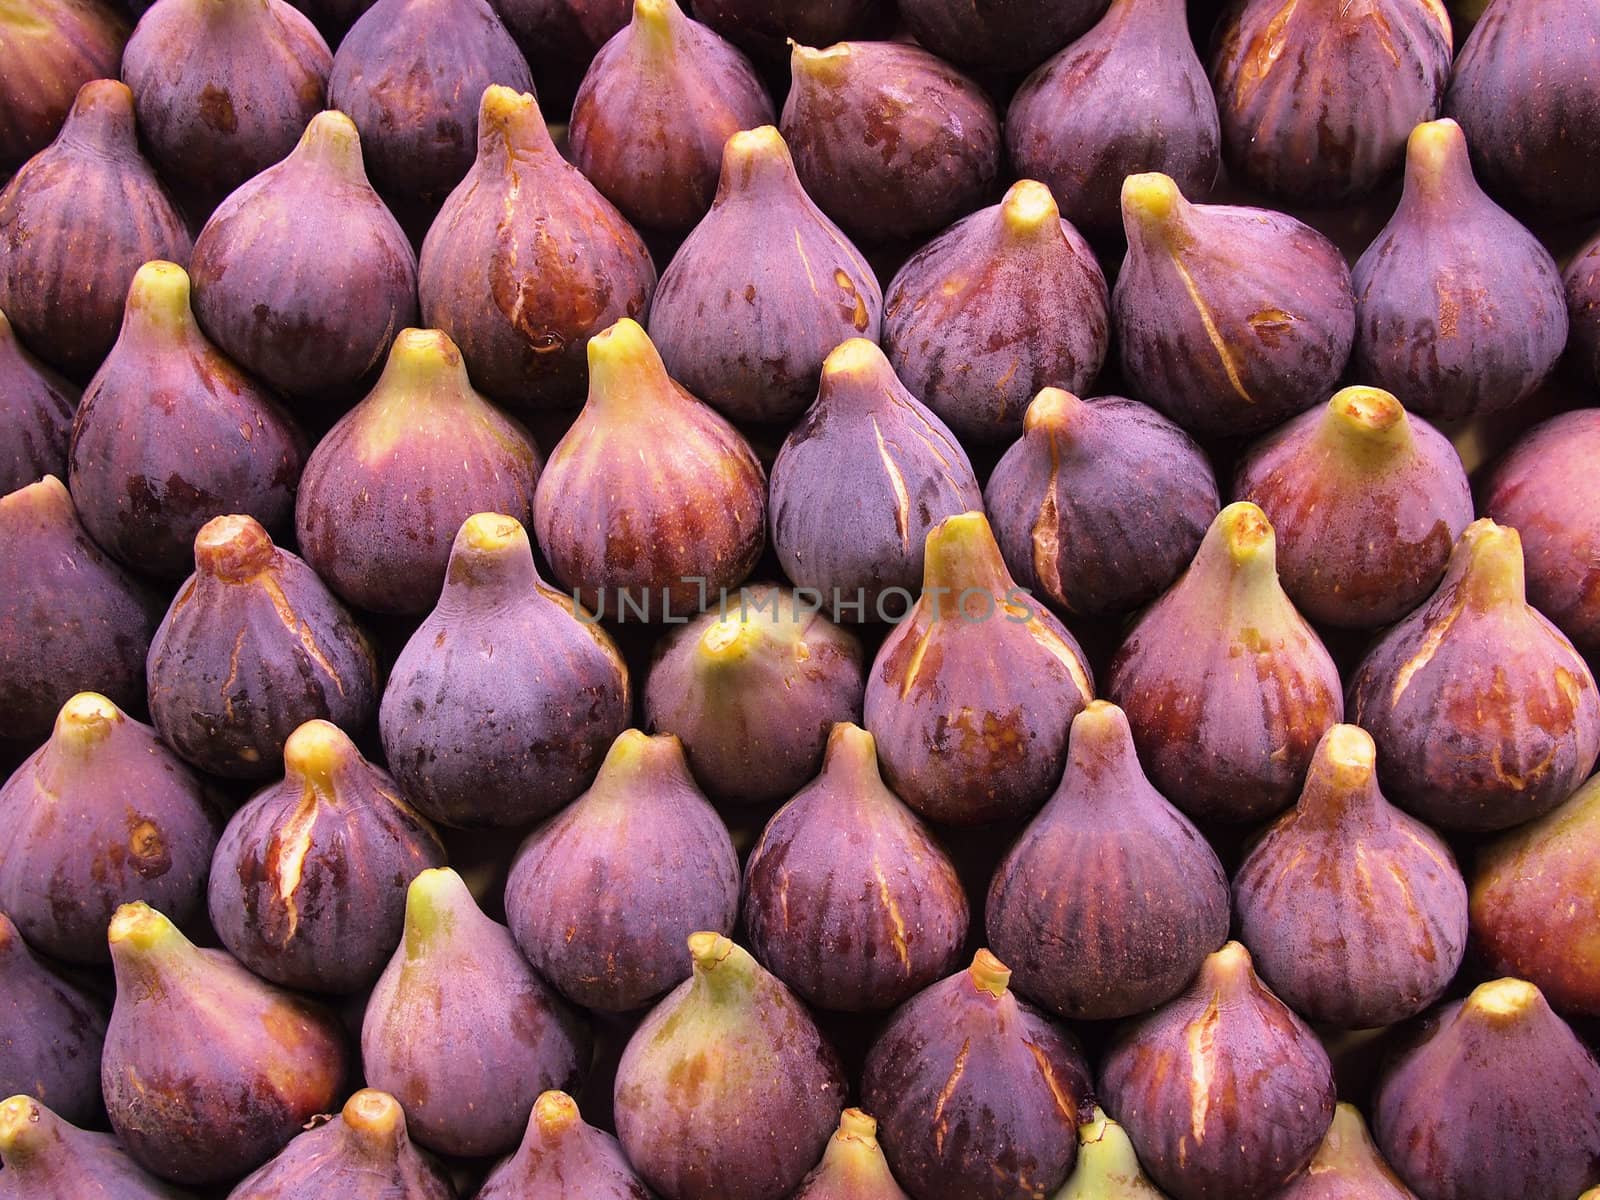 Display of fresh figs at a fruit market. Can be used as a healthy food background.